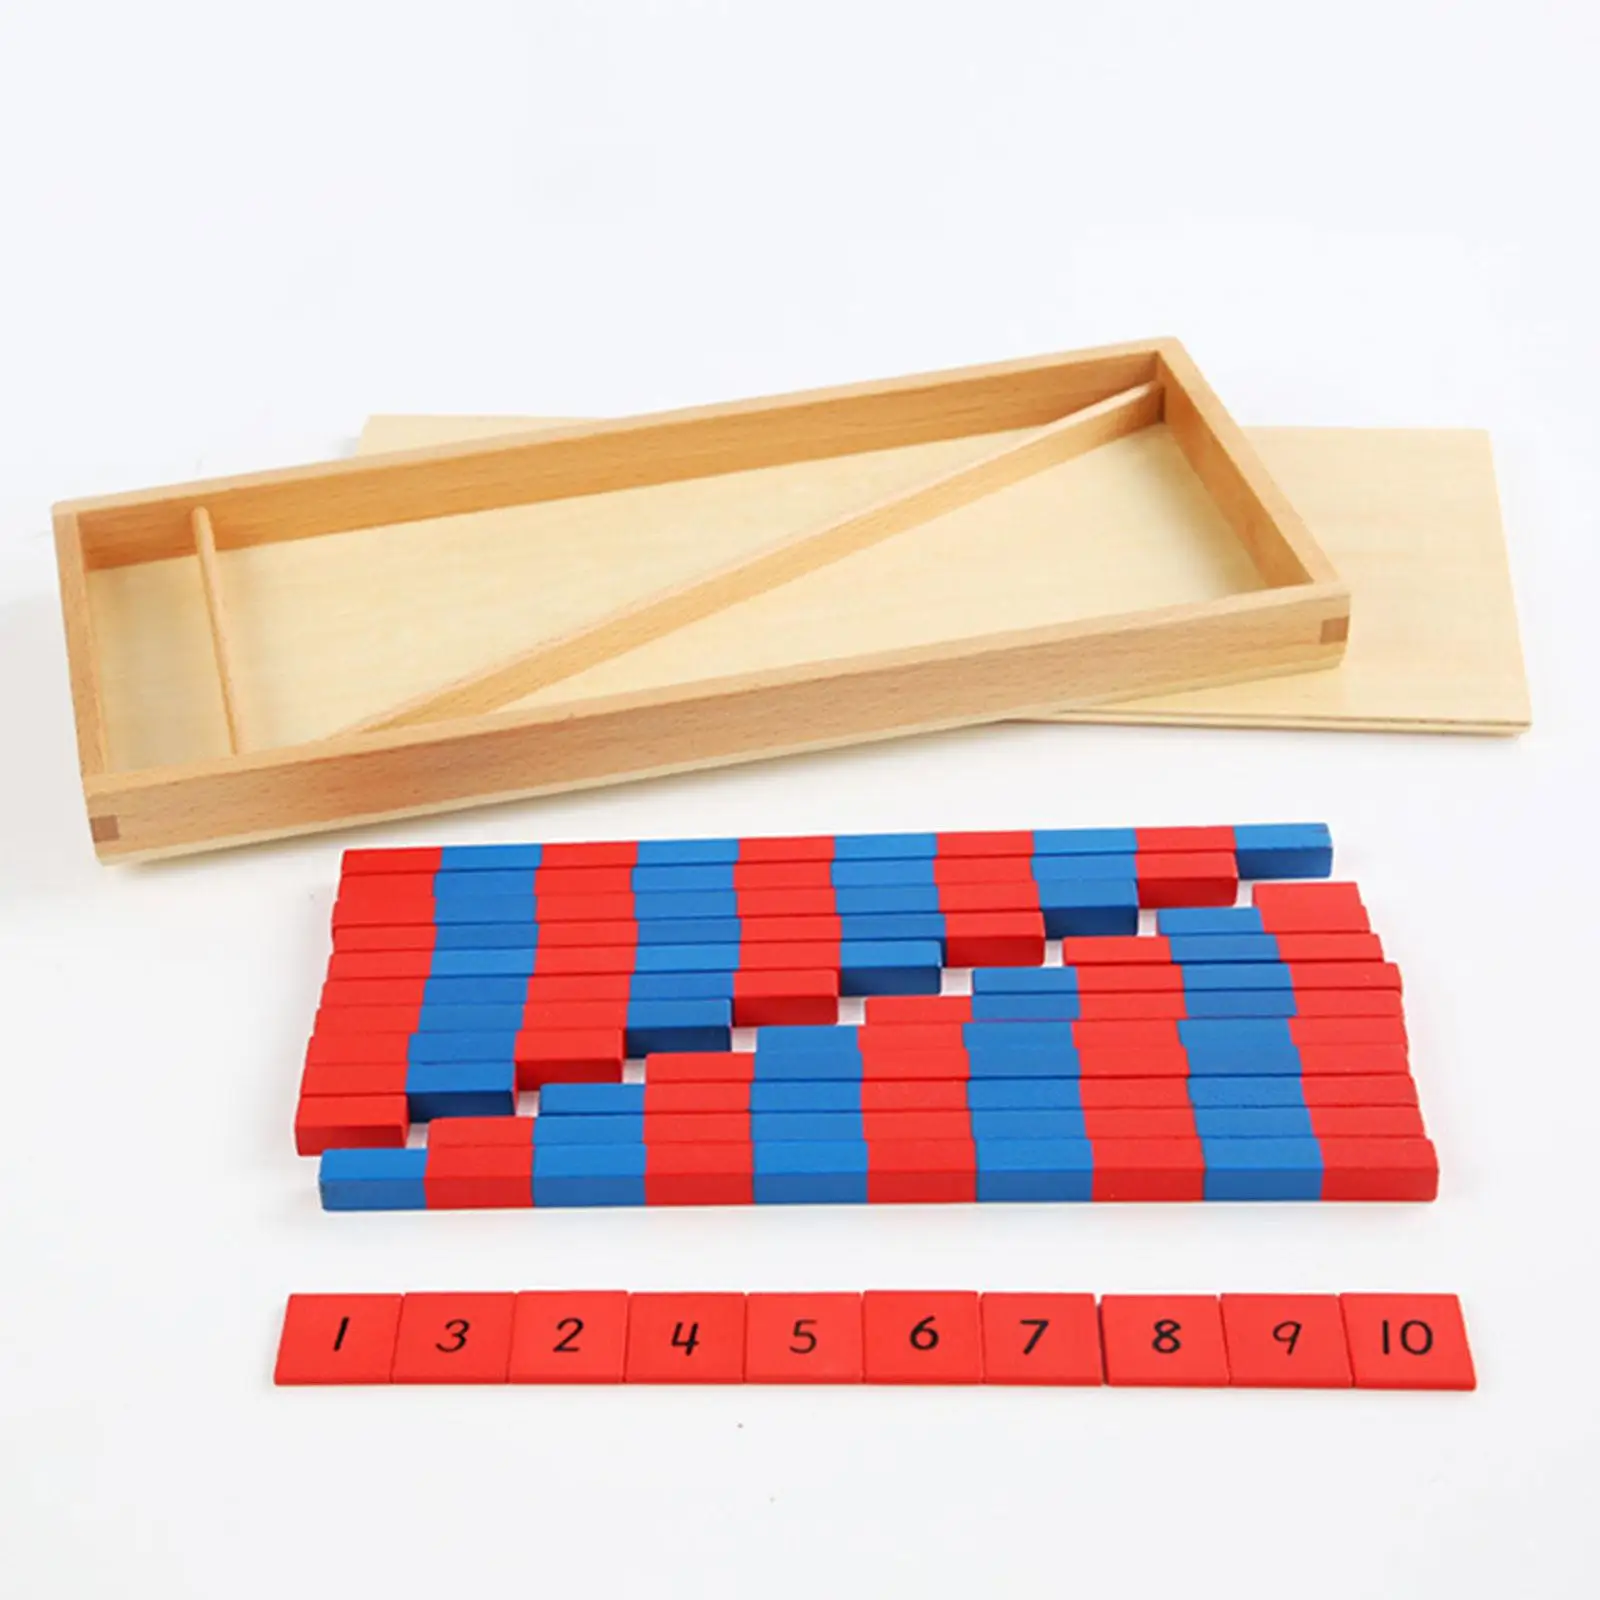 Montessori Red Blue Number Rods Counting Sticks Wooden Mathematic Aid for Learning Activities Family Daycares Holiday